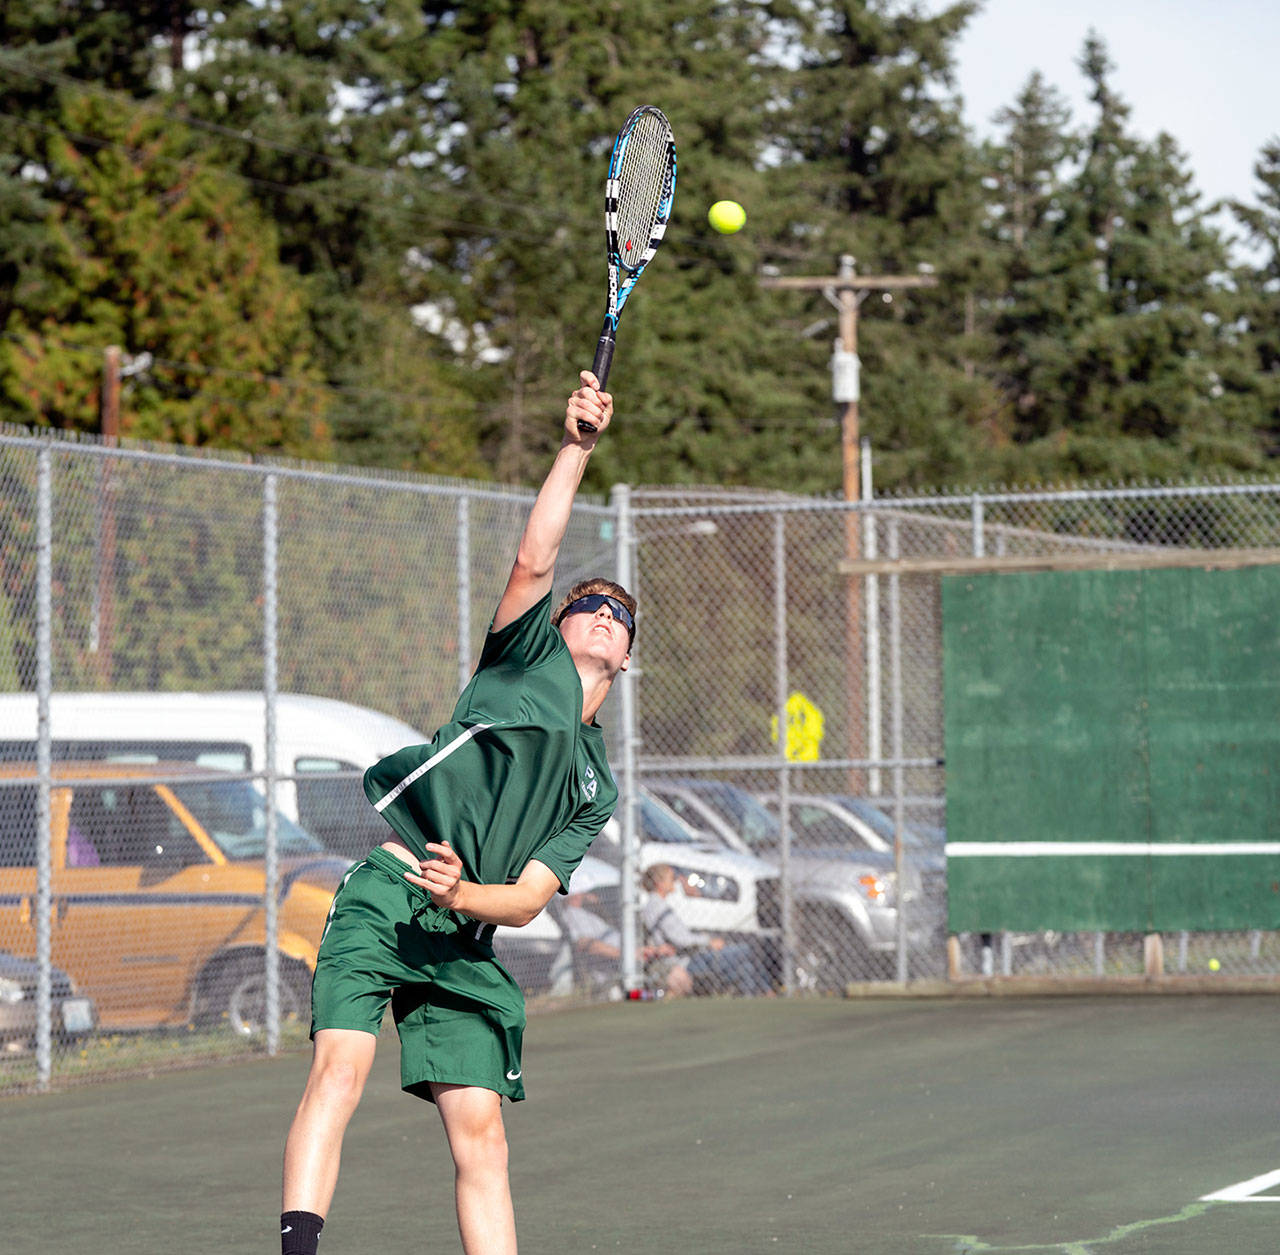 Port Angeles’ Wyatt Hall hits a serve during a match against Chimacum’s Rowan Powell on Tuesday in Chimacum. (Steve Mullensky/for Peninsula Daily News)